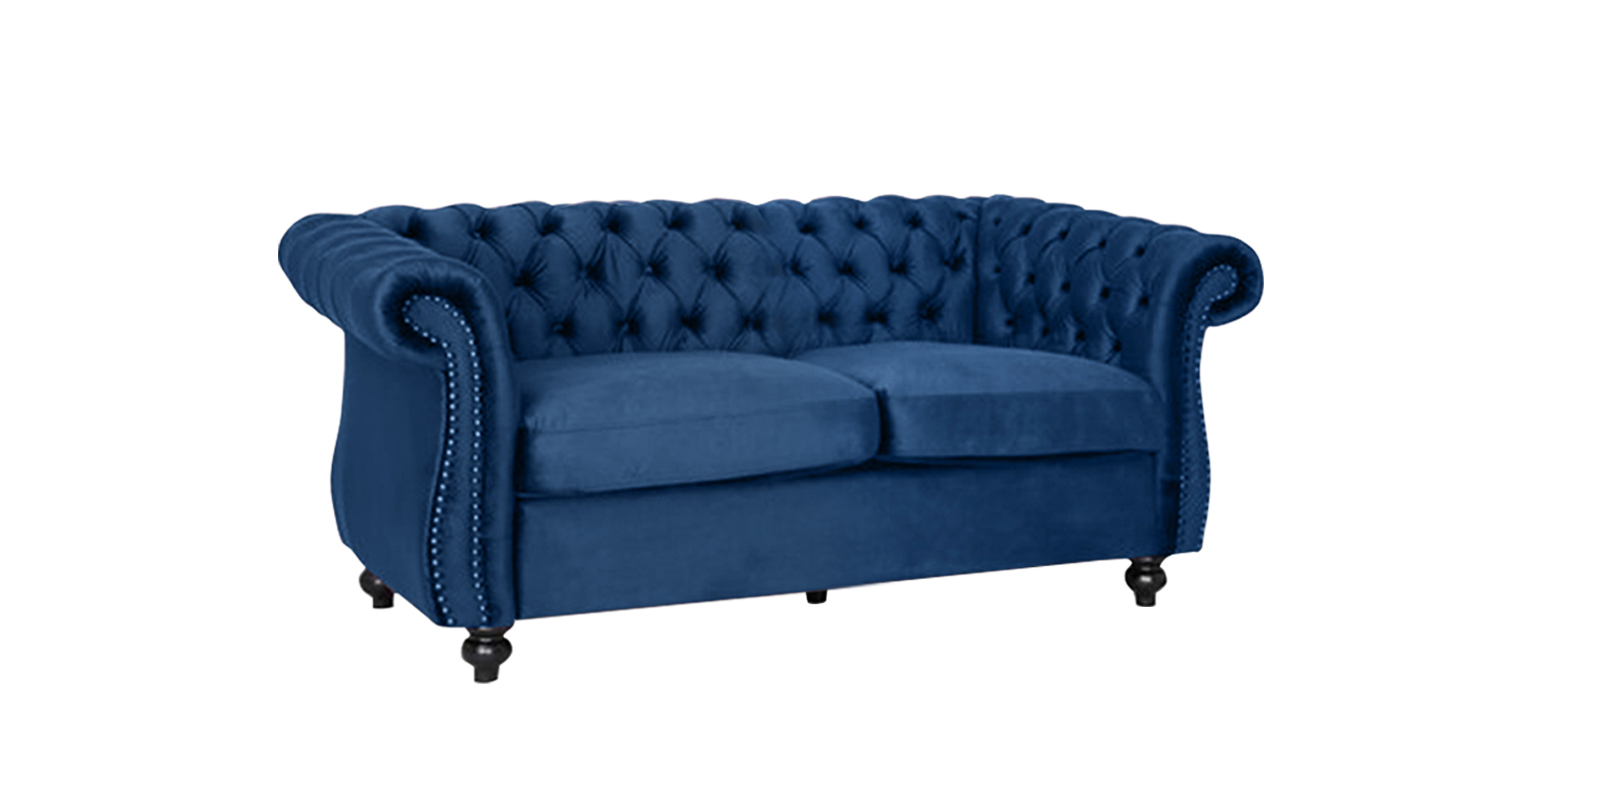 Phenomenal Fabric 2 Seater Sofa in Navy Blue Colour - Dreamzz ...